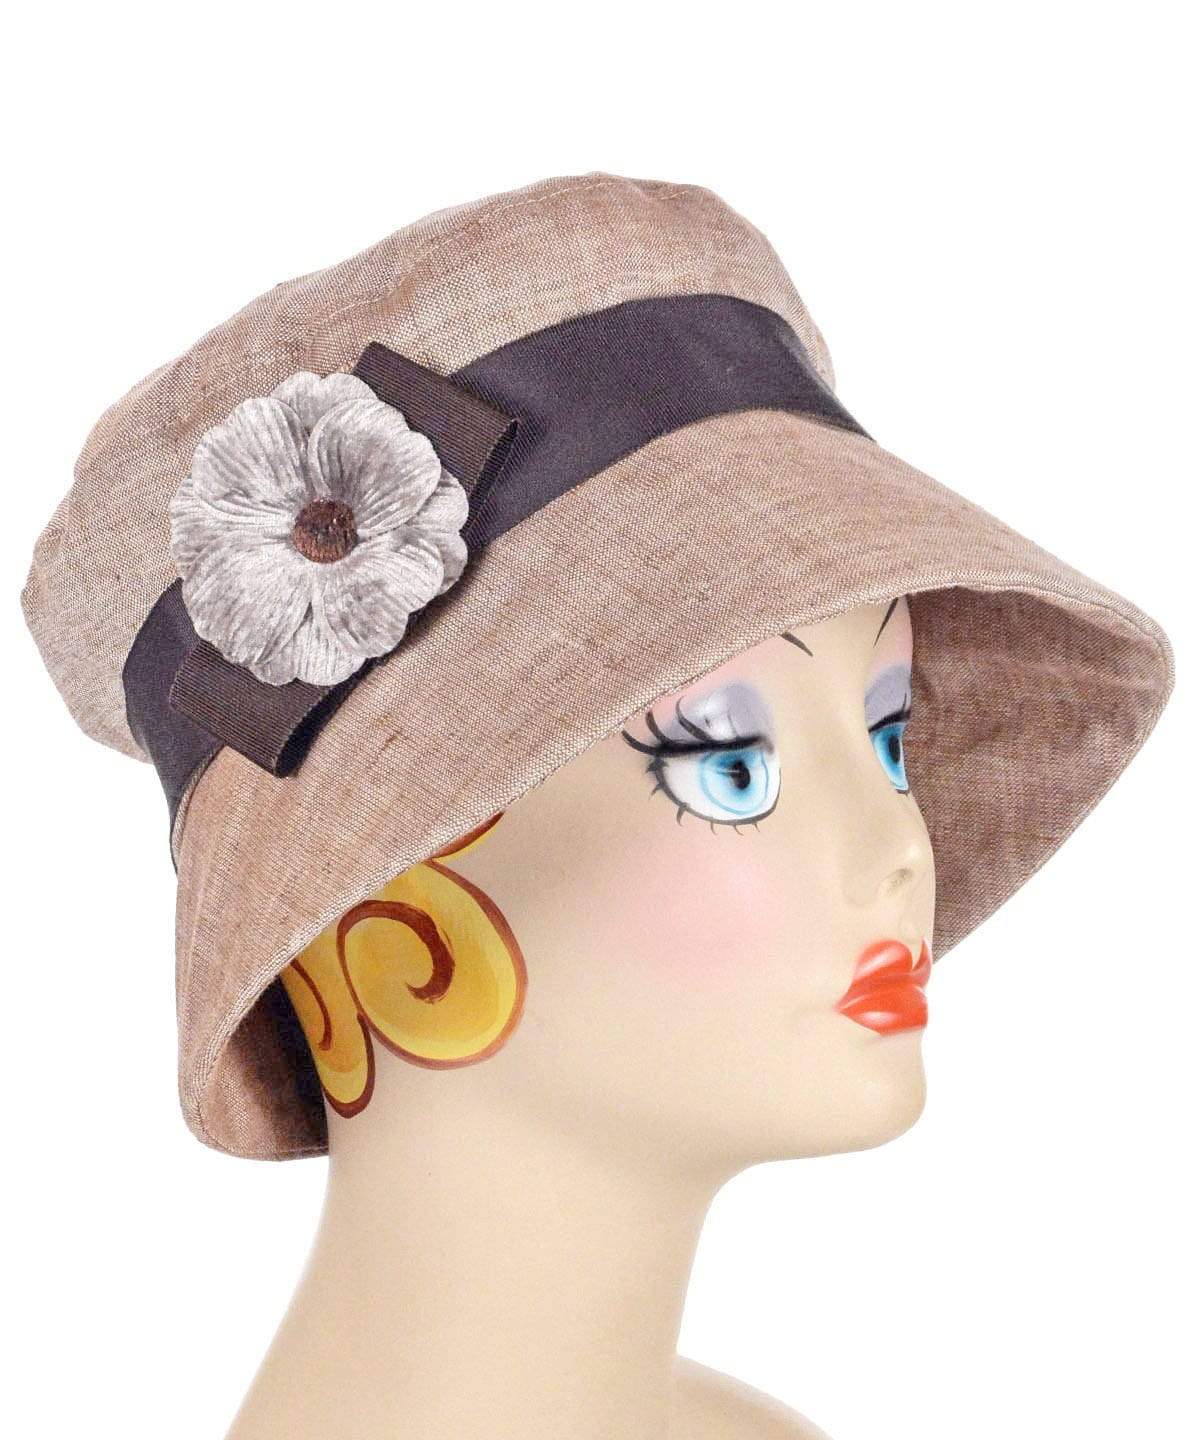 Molly Bucket Style Hat Coral Linen with Chocolate Band and Cream Velvet Flower | Handmade By Pandemonium Millinery | Seattle WA USA